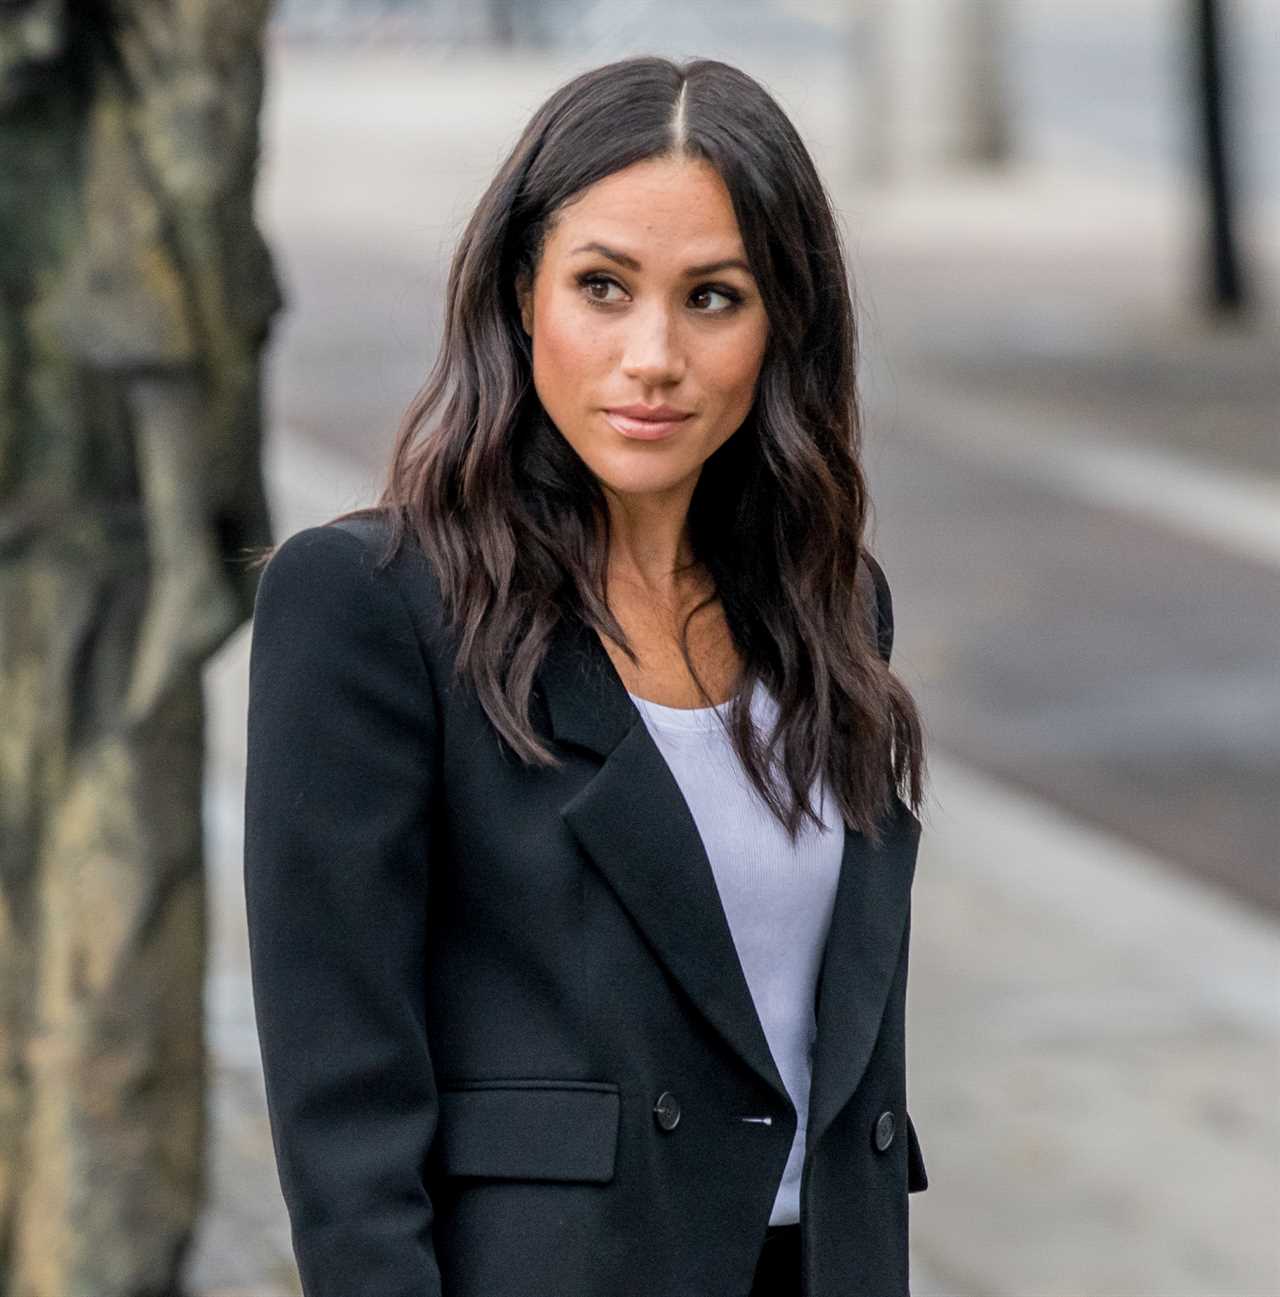 Meghan Markle ditched her ‘principles’ to get ahead – and now sneers at women for doing the same, says Ulrika Jonsson